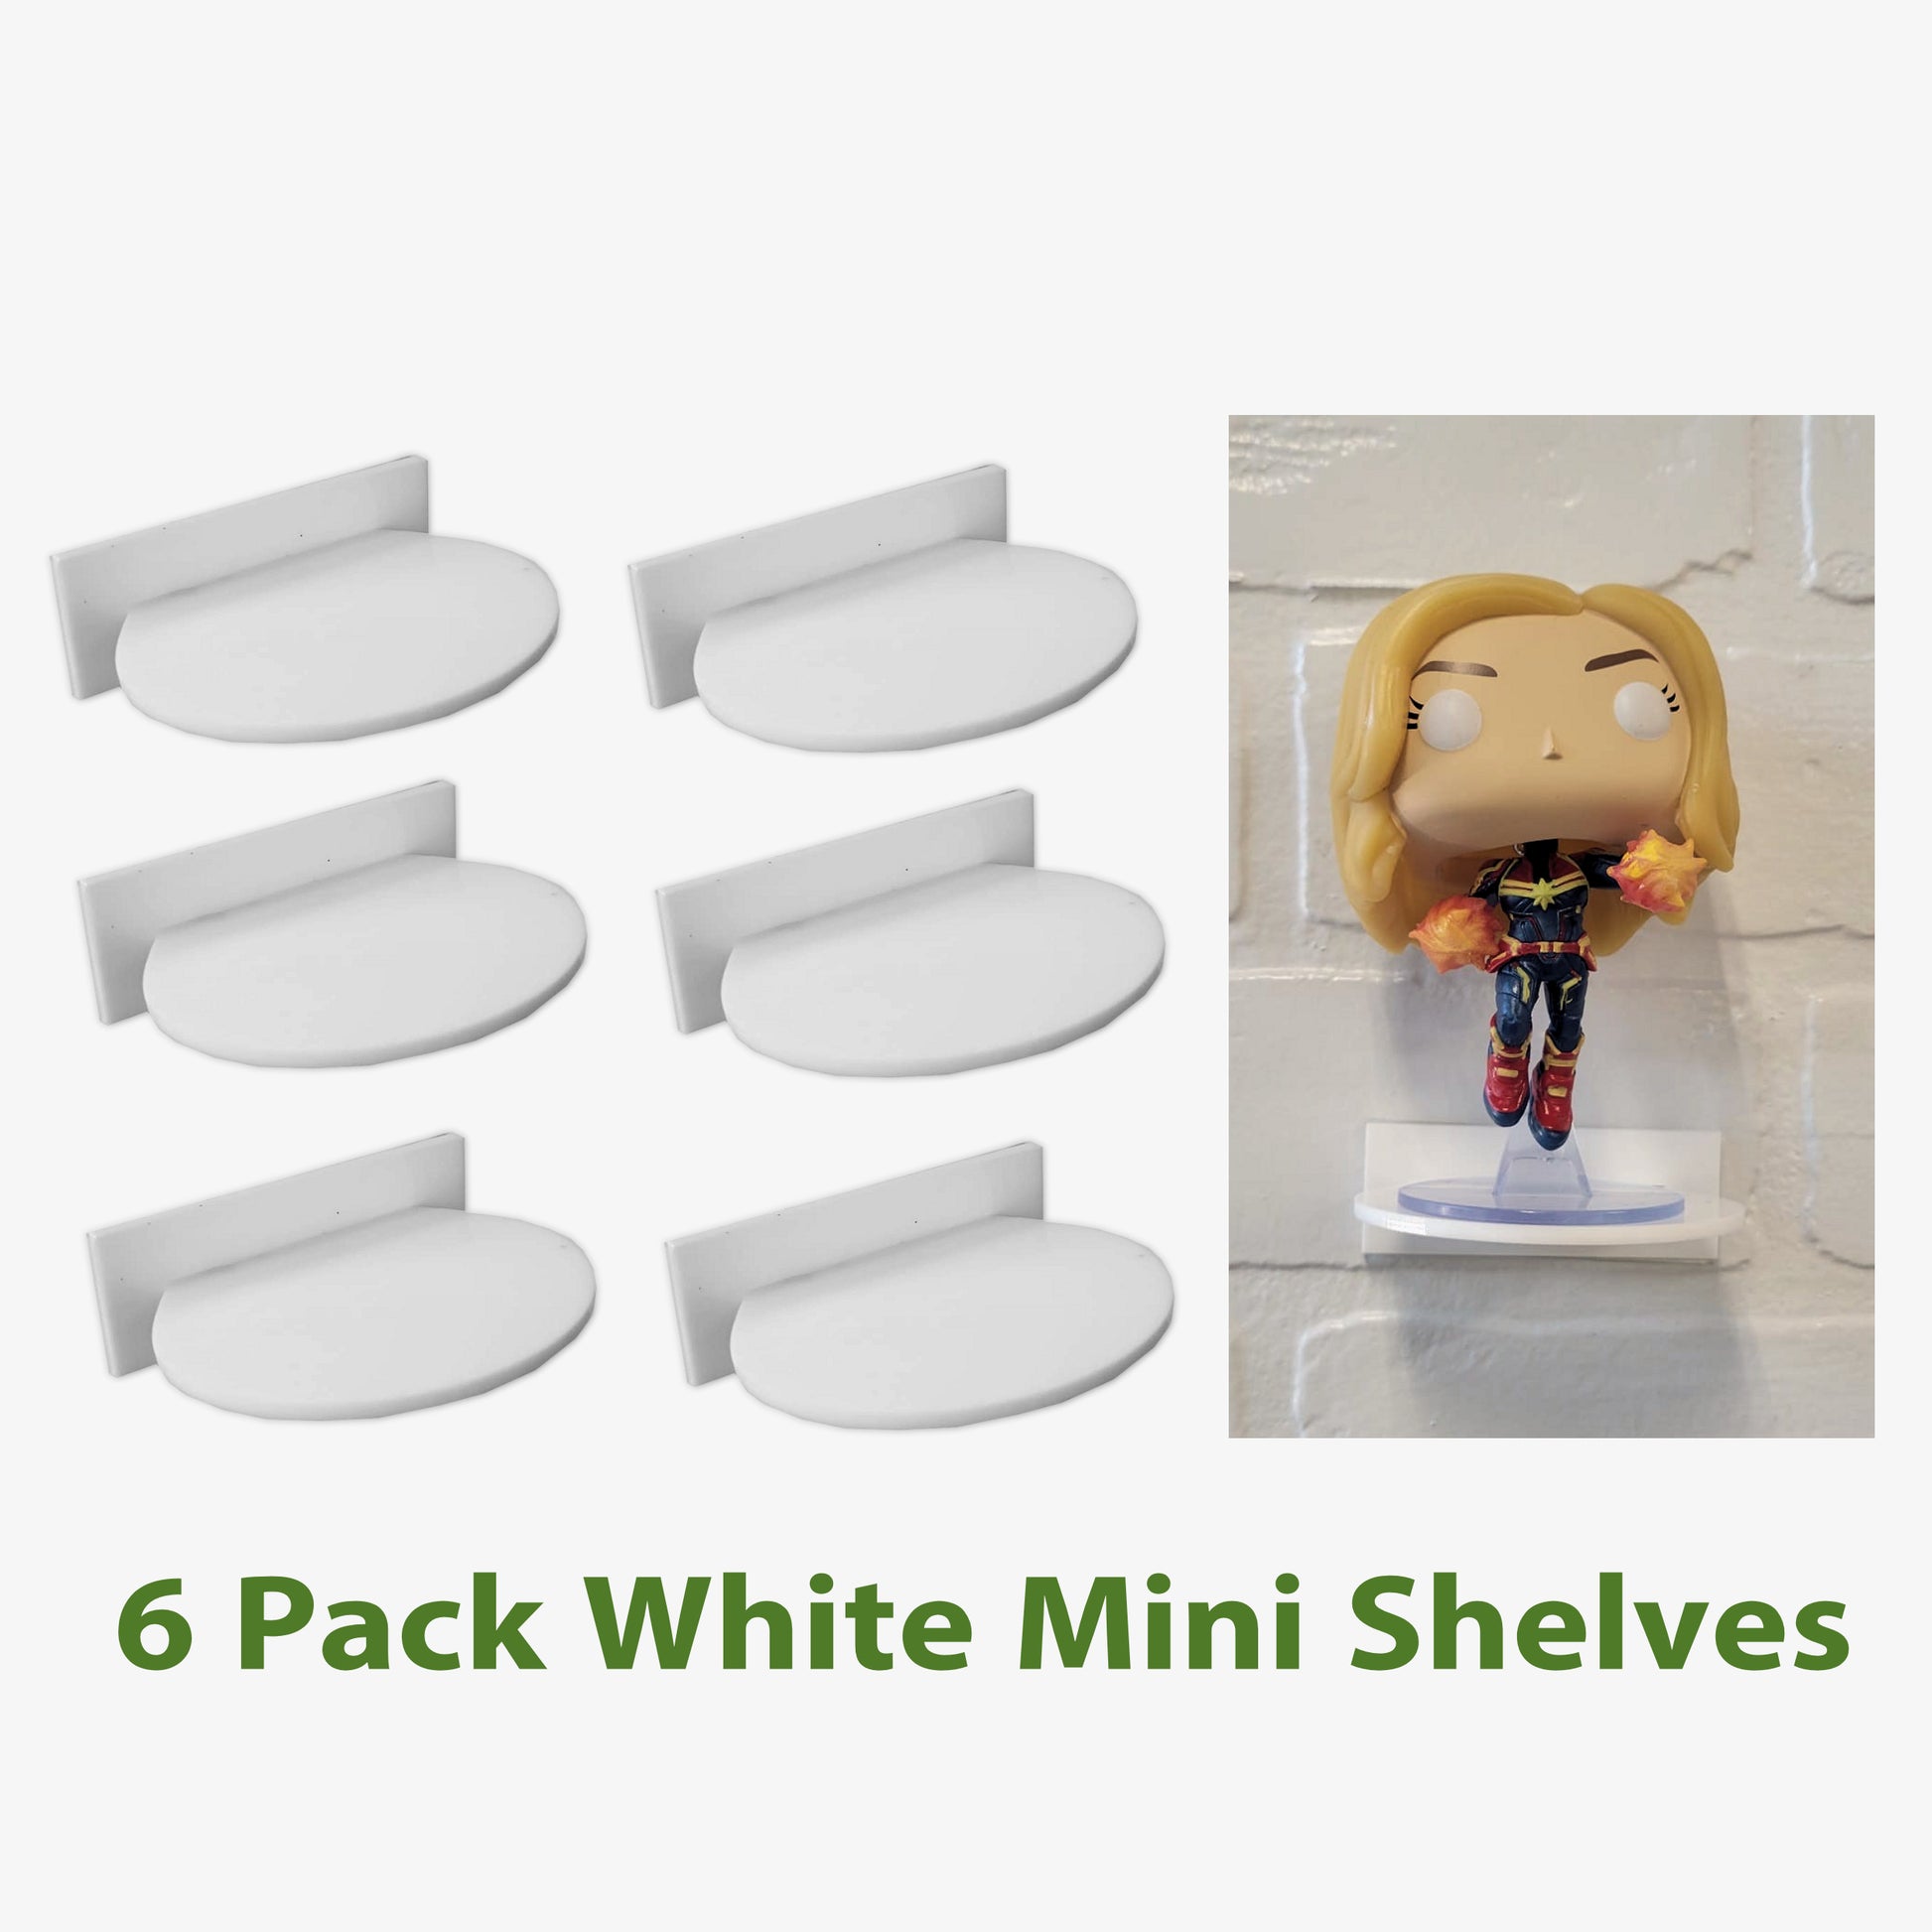 For Funko Pop Vinyl or Funko Pin, White Acrylic Wall Stand, Stick On, Single Shelf No Nails or Screws